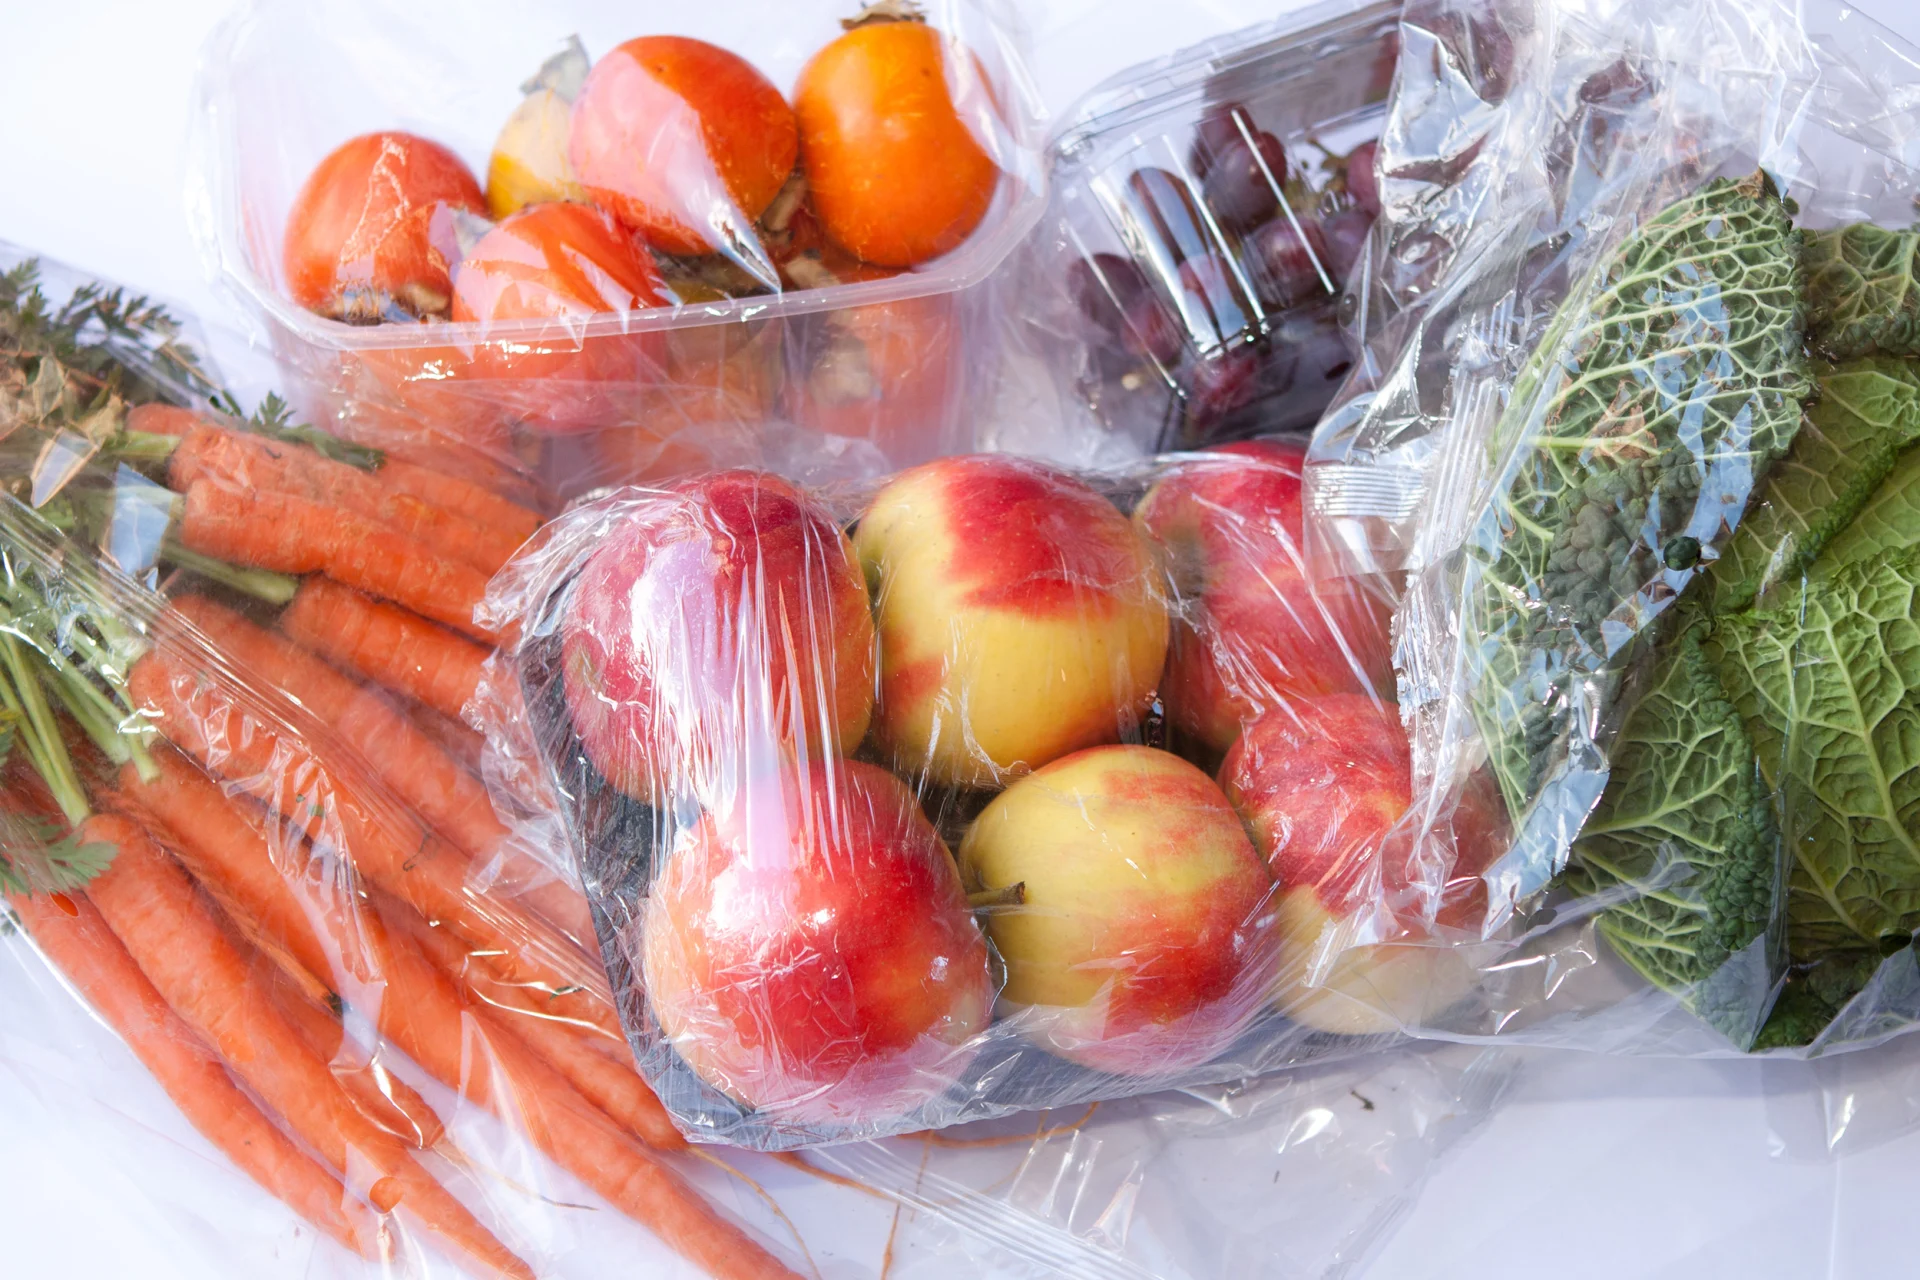 Carrots, tomatoes, apples, grapes and cabbage are all sold in plastic packaging.